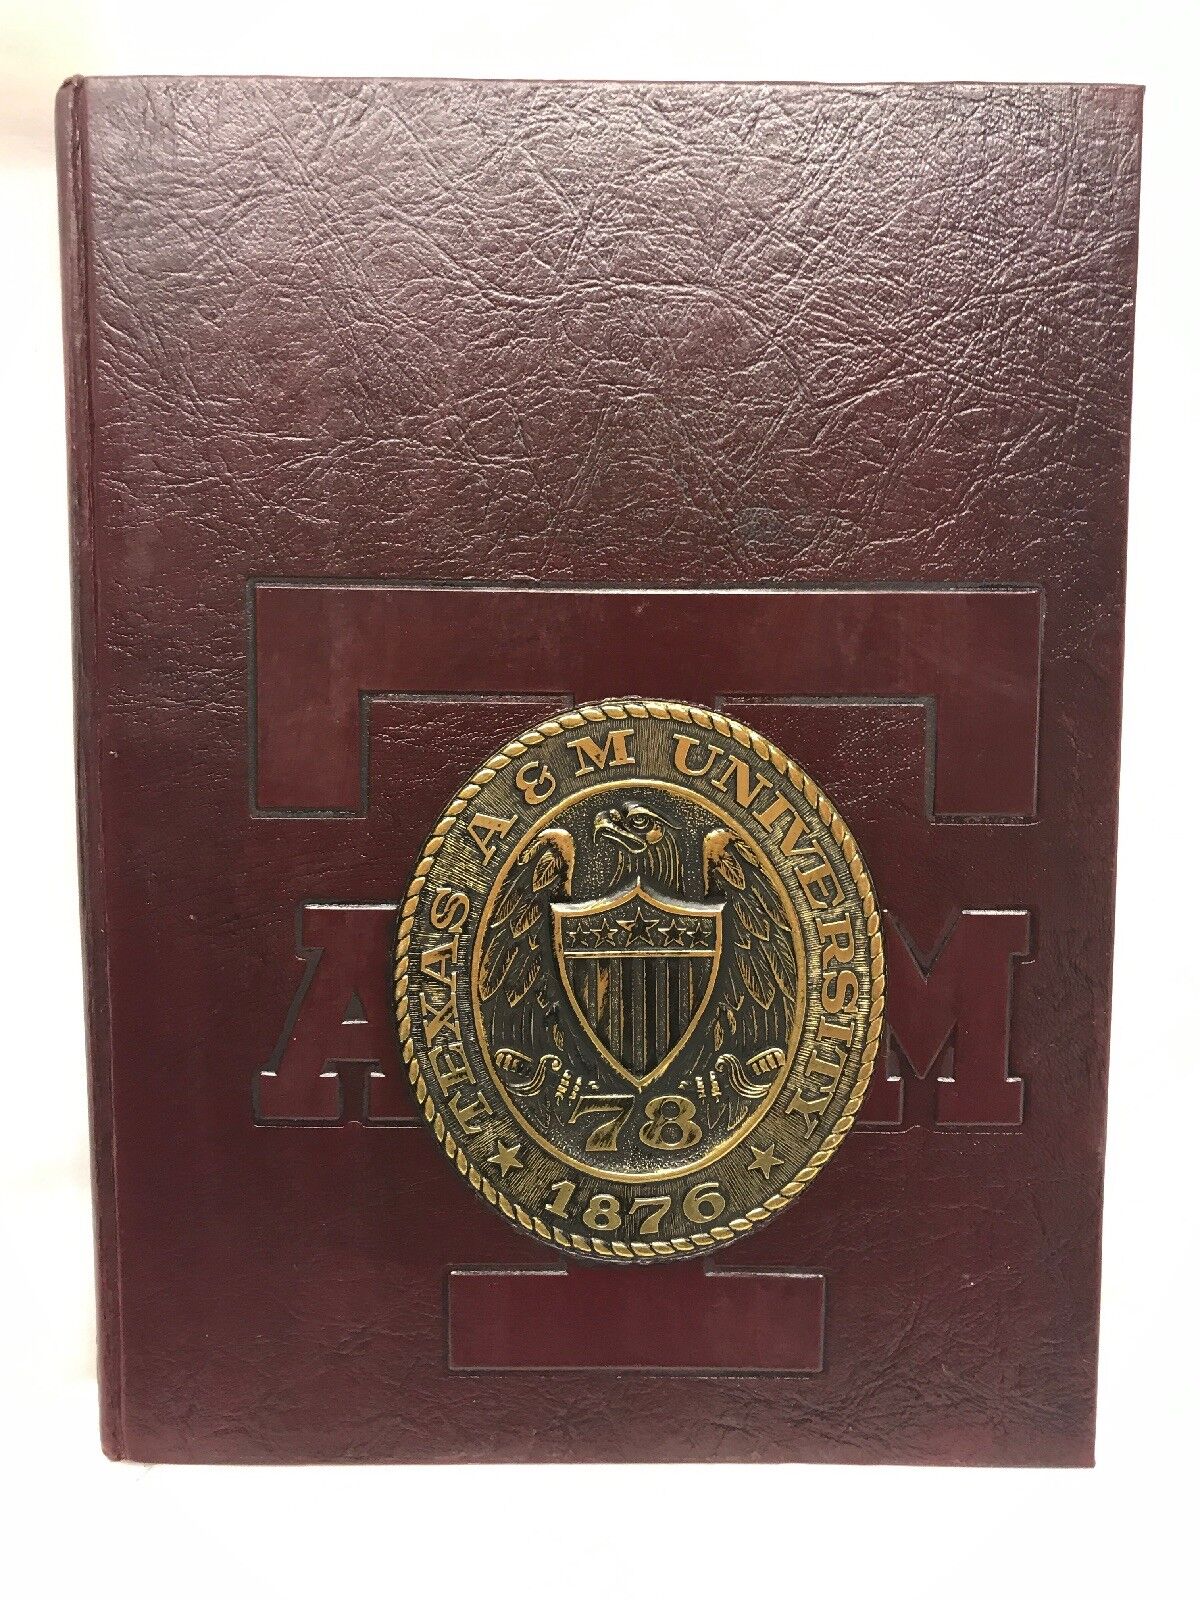 1978 Texas A&M University Yearbook Aggies Aggieland